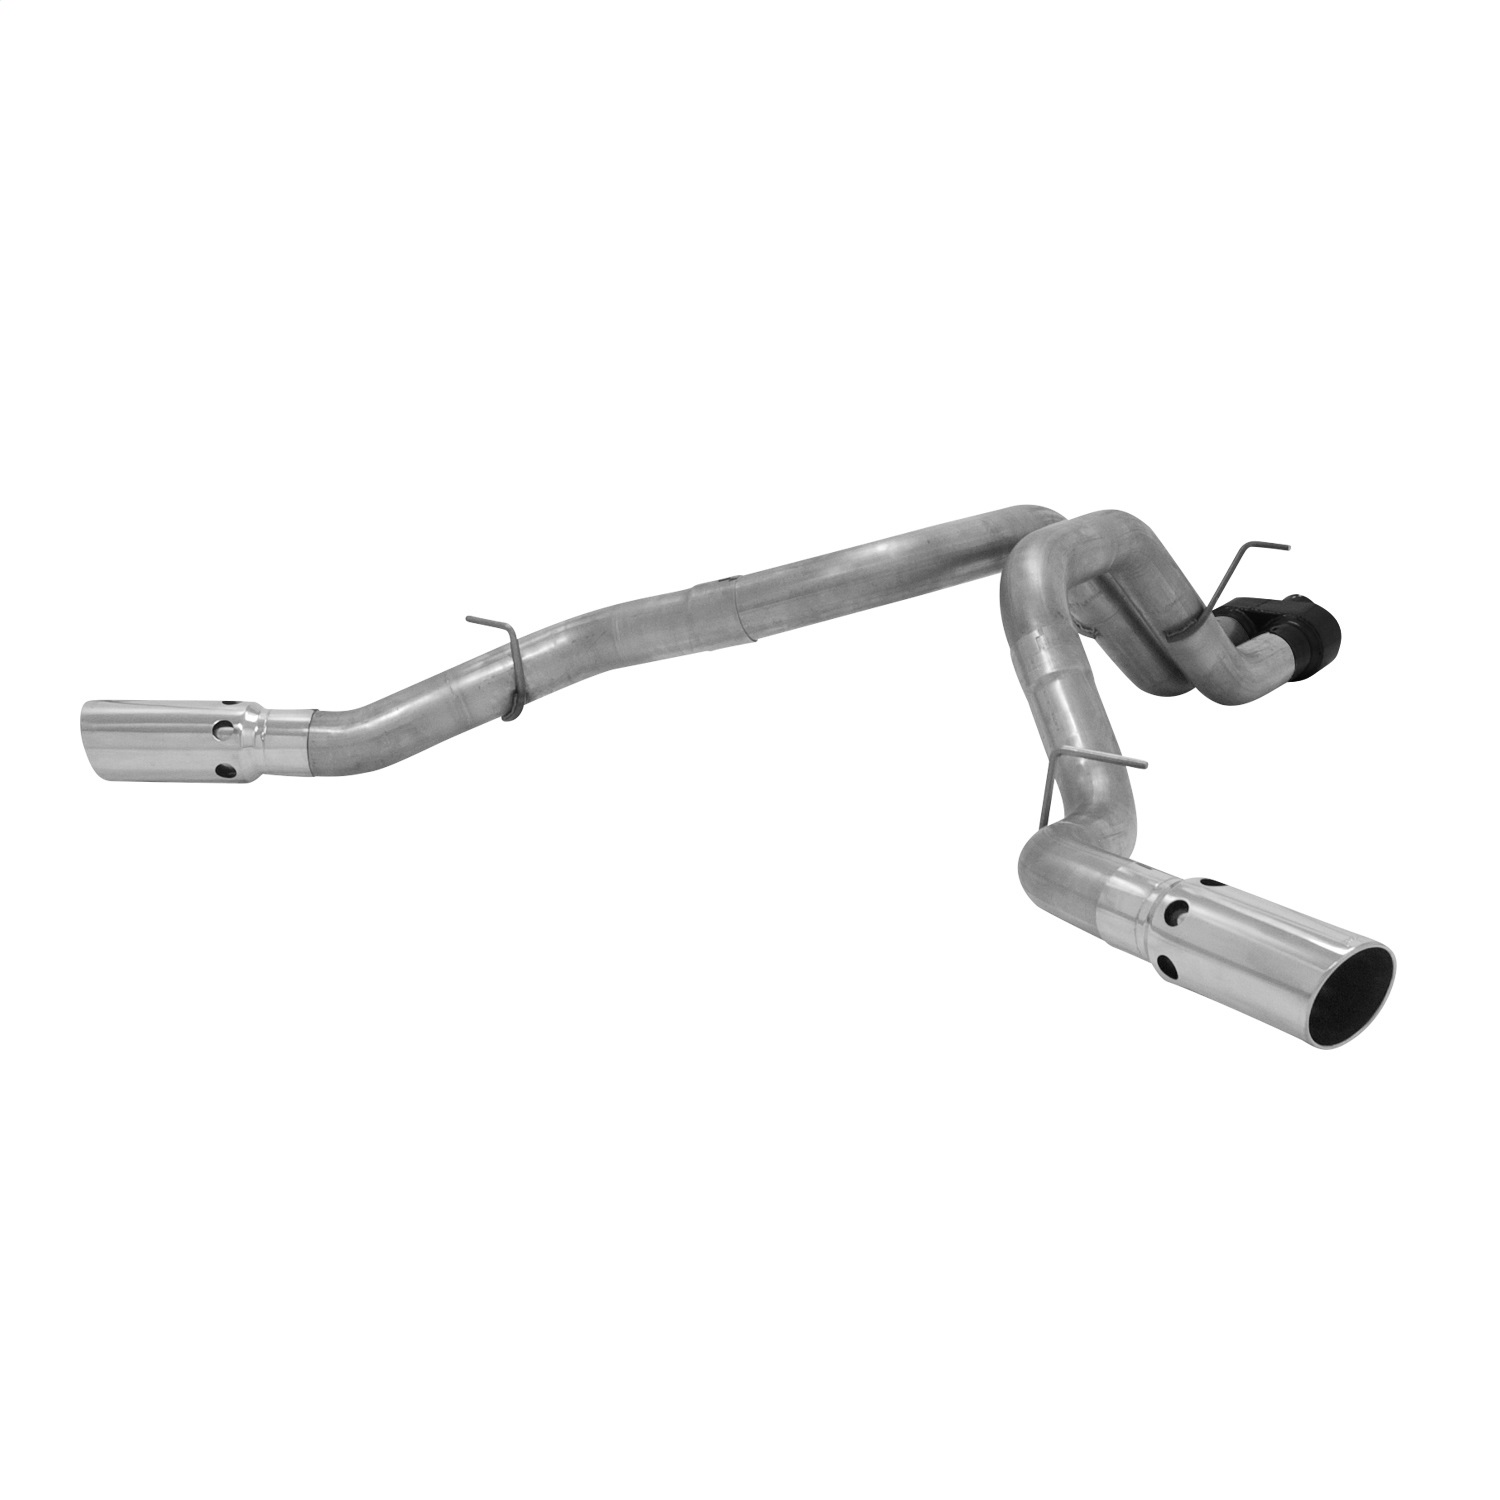 Flowmaster Flowmaster 817648 Force II DPF-Back Exhaust System